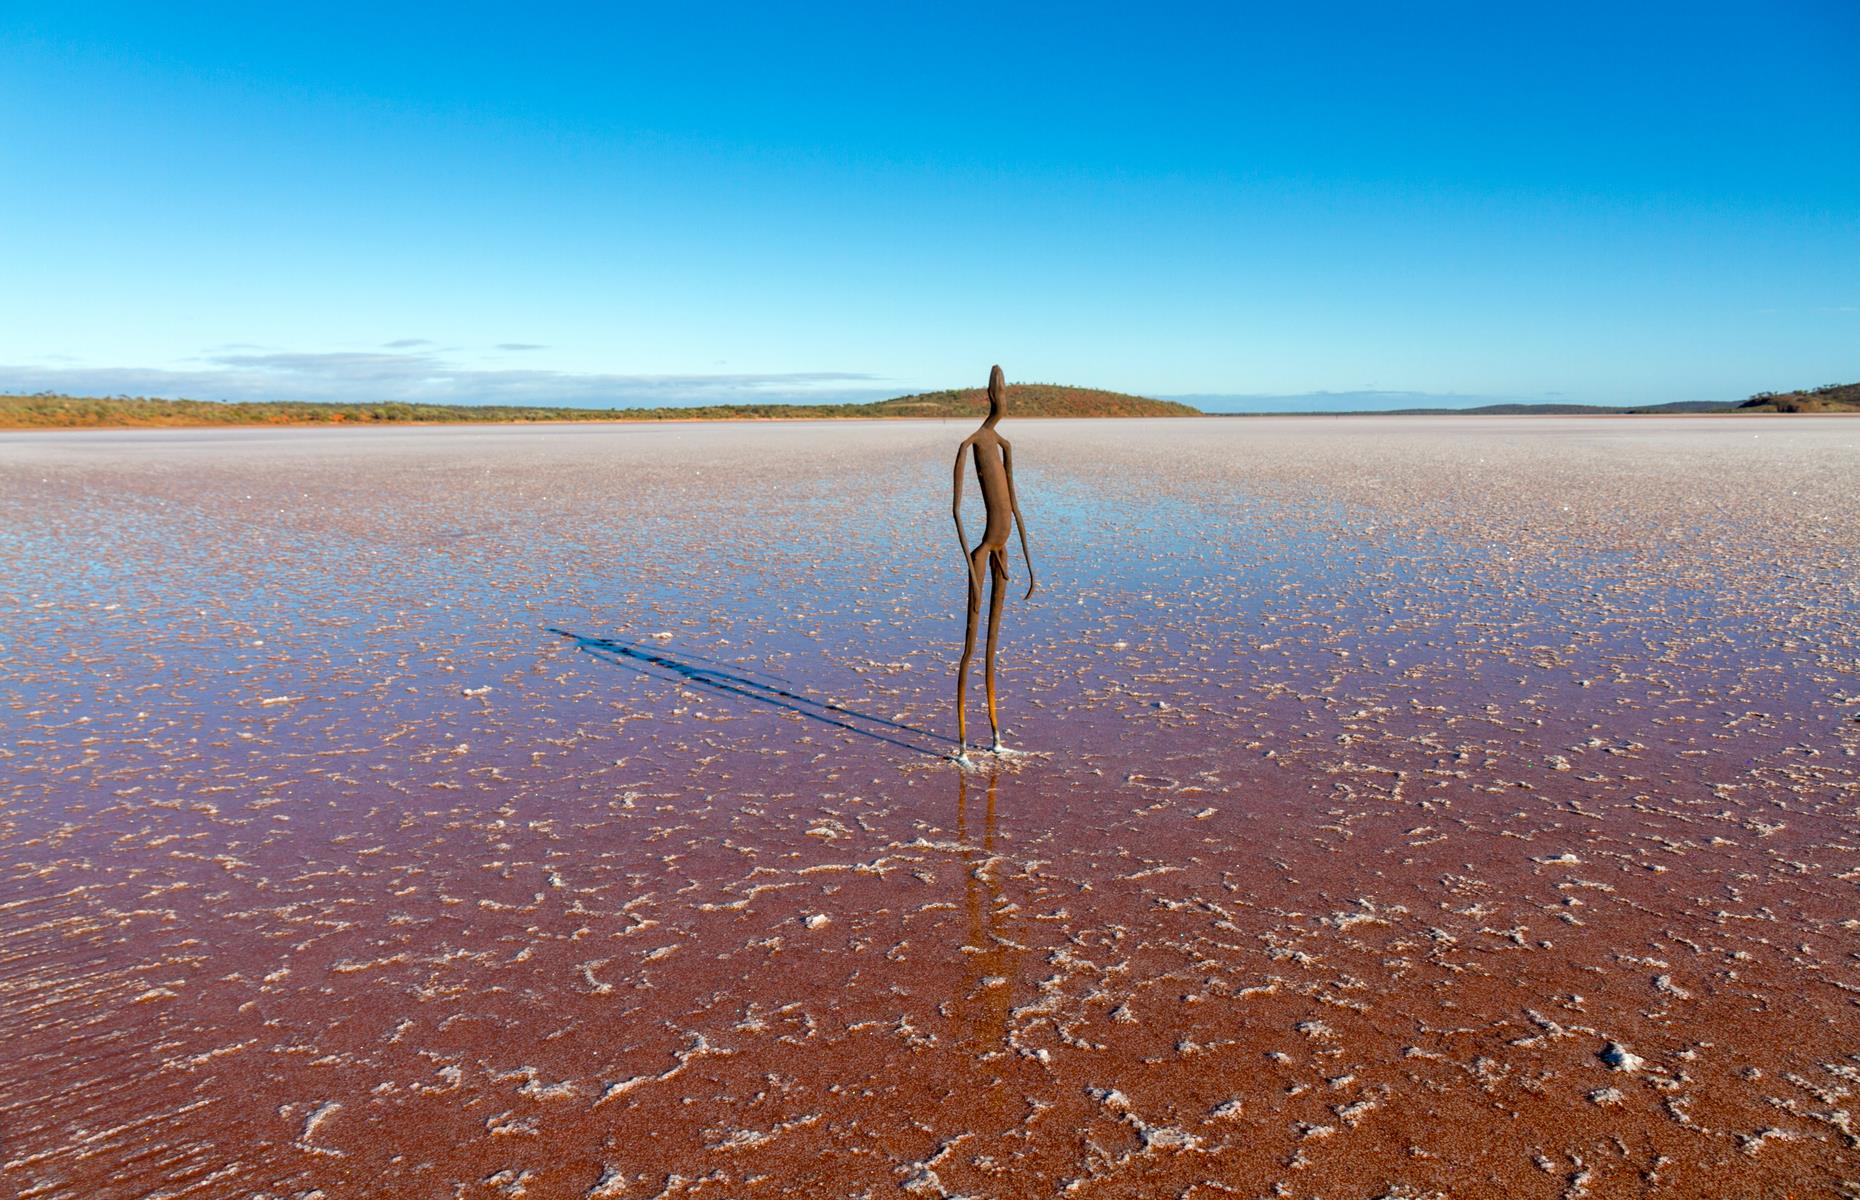 <p>Antony Gormley’s haunting outback exhibition, <a href="http://lakeballard.com/">Inside Australia</a>, can be found on the white salt plain of Lake Ballard in Western Australia’s Goldfields region. Covering four square miles (10sq km), it’s one of the largest outdoor art galleries in the world, so leave plenty of time to walk about and admire this extraordinary natural landscape that has been heightened by Gormley’s installation. The 51 black chromium steel sculptures were modelled on people from the nearby town of Menzies.</p>